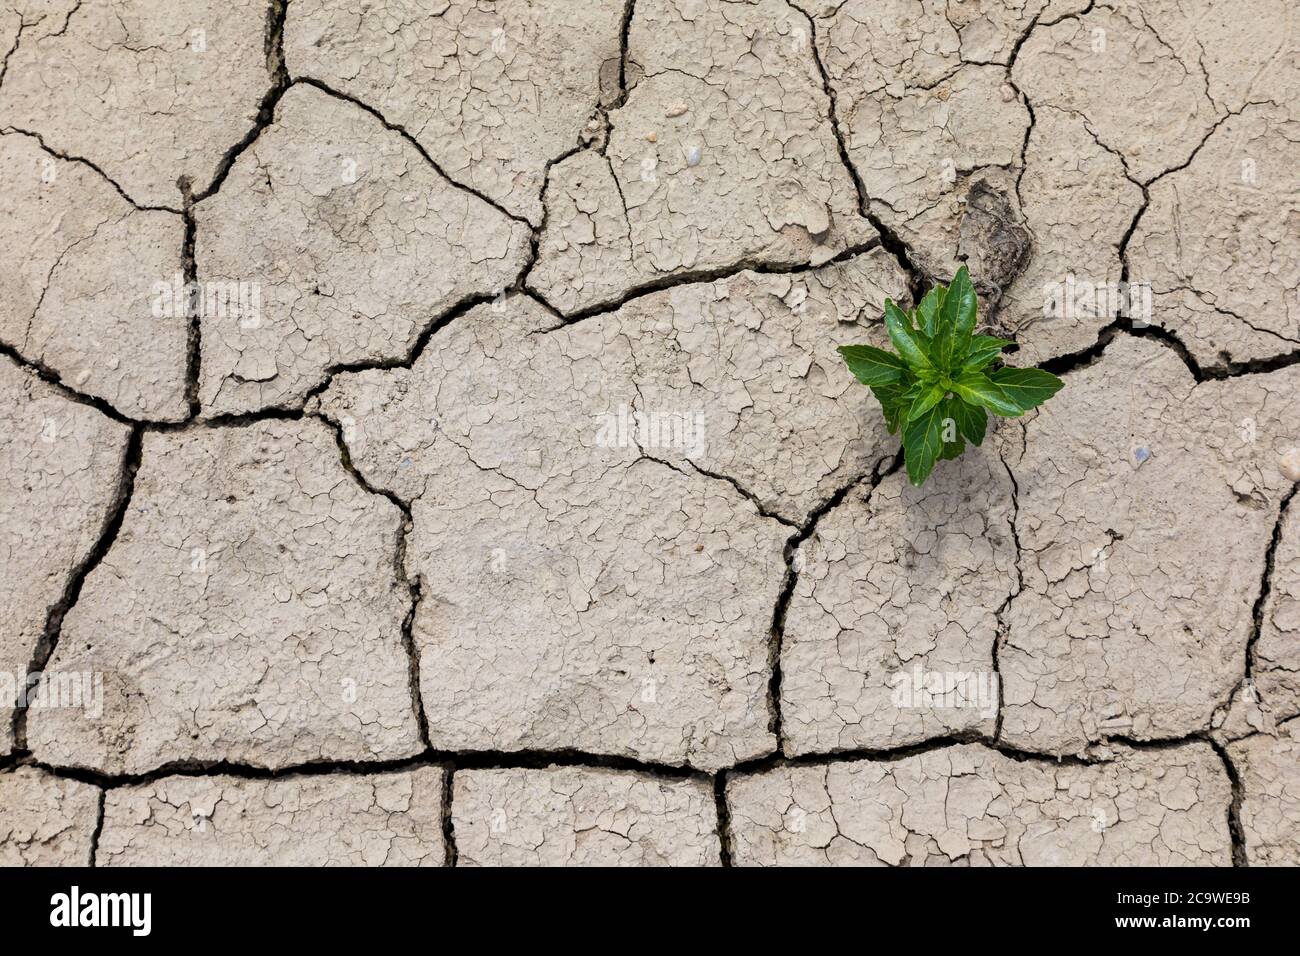 Dry cracked soil. The fields are missing rain. Stock Photo